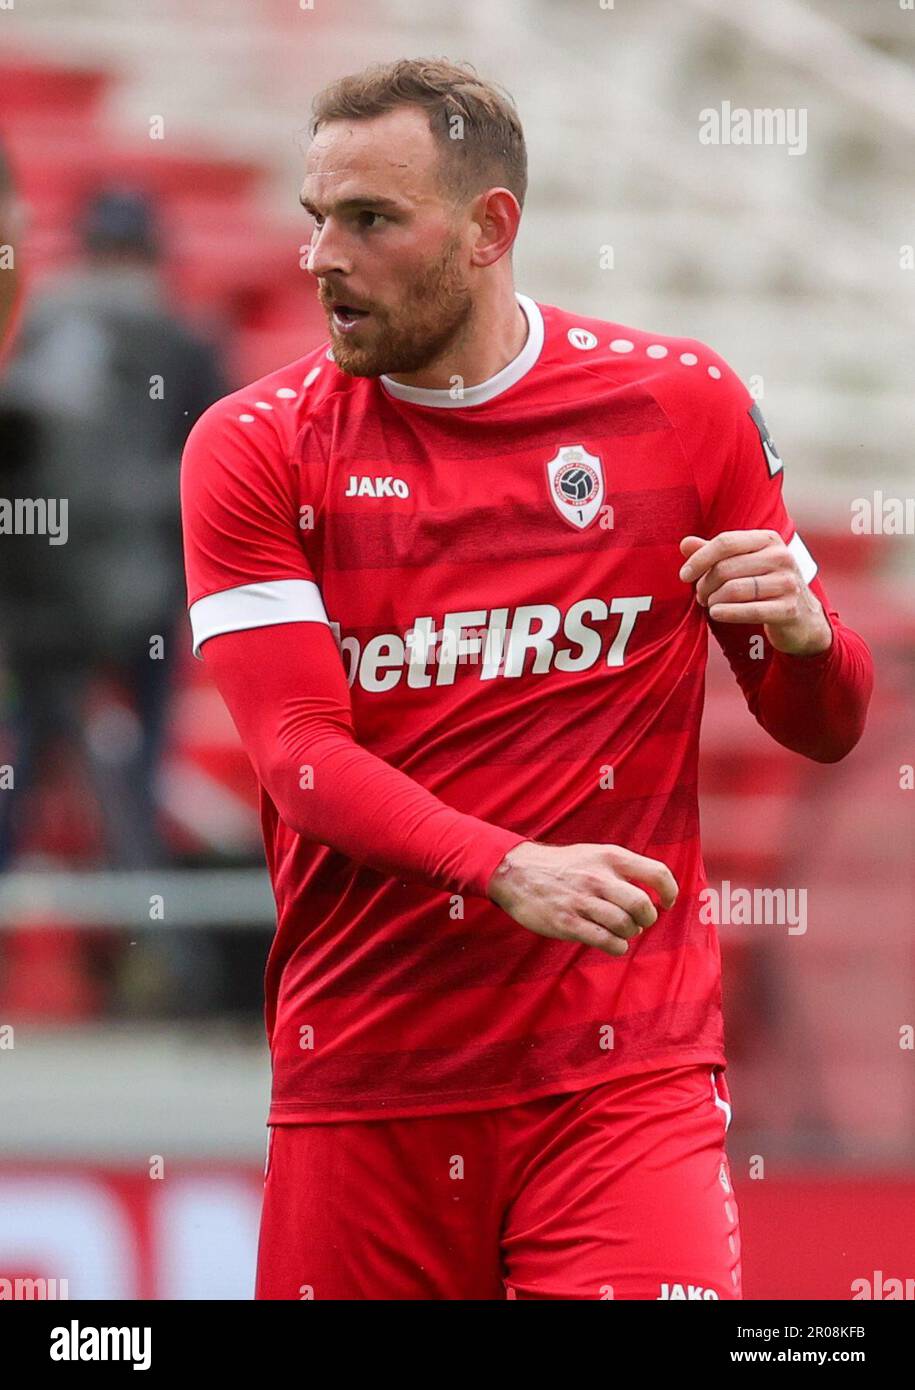 Antwerp's Vincent Janssen looks dejected during a soccer match between Royal Antwerp FC RAFC and KRC Genk, Sunday 07 May 2023 in Antwerp, on day 2 of the Champions' play-offs in the 'Jupiler Pro League' first division of the Belgian championship. BELGA PHOTO VIRGINIE LEFOUR Stock Photo